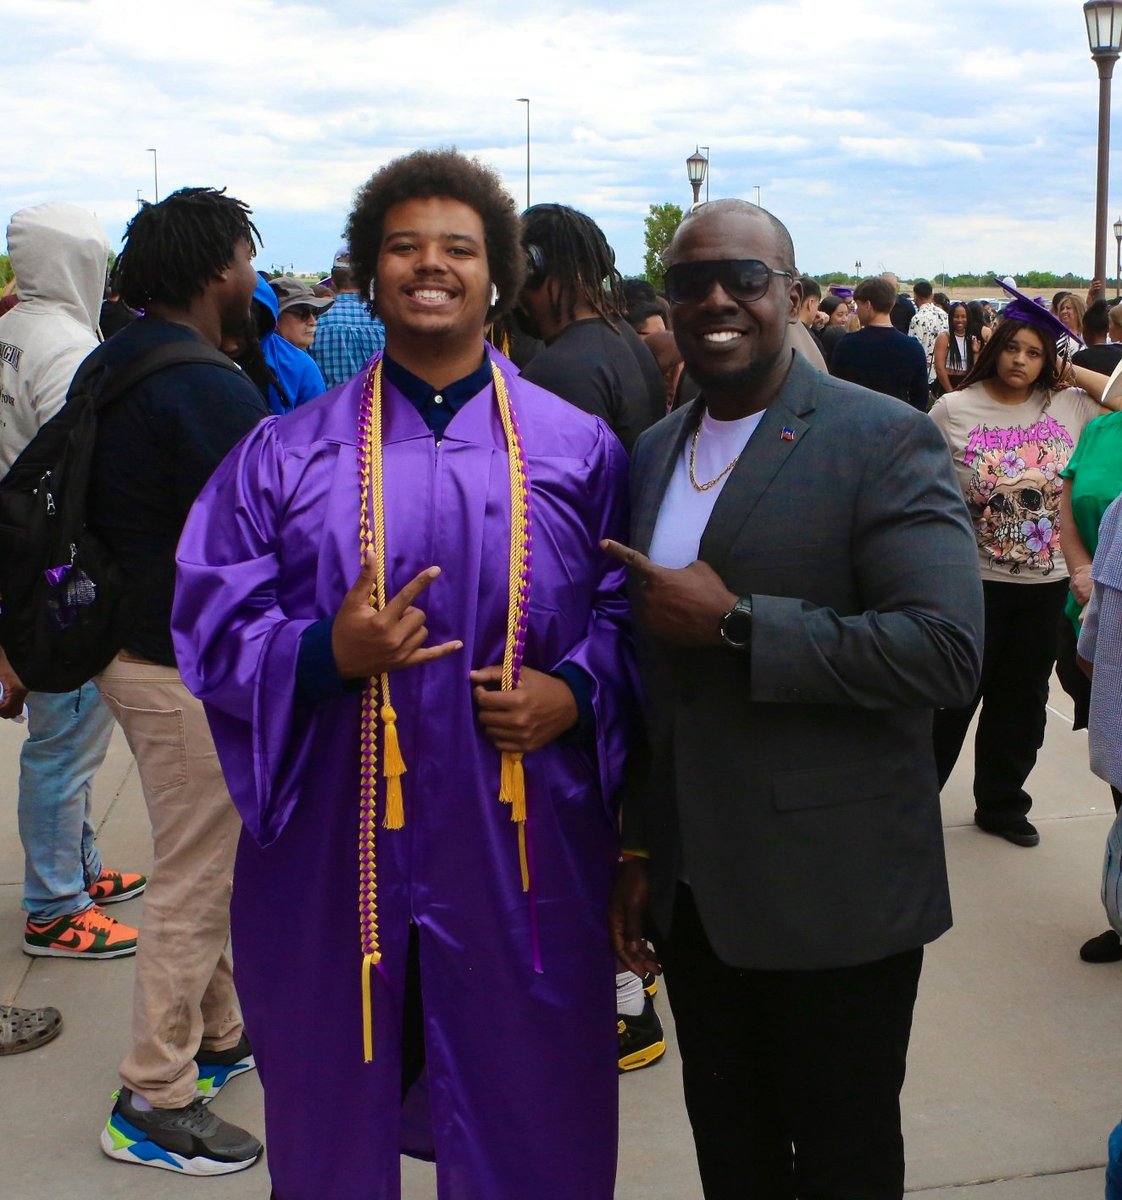 My guys!!! OL/TE ❤️!!!! Just missing @AArcher & @GGenross since they graduated in back December 2023 🎓🎊🎉💯🙌🏿🥳❤️ #TrenchMobb #Graduation2024 #DodgeCityFootball @GoConqsFB @GoConqs